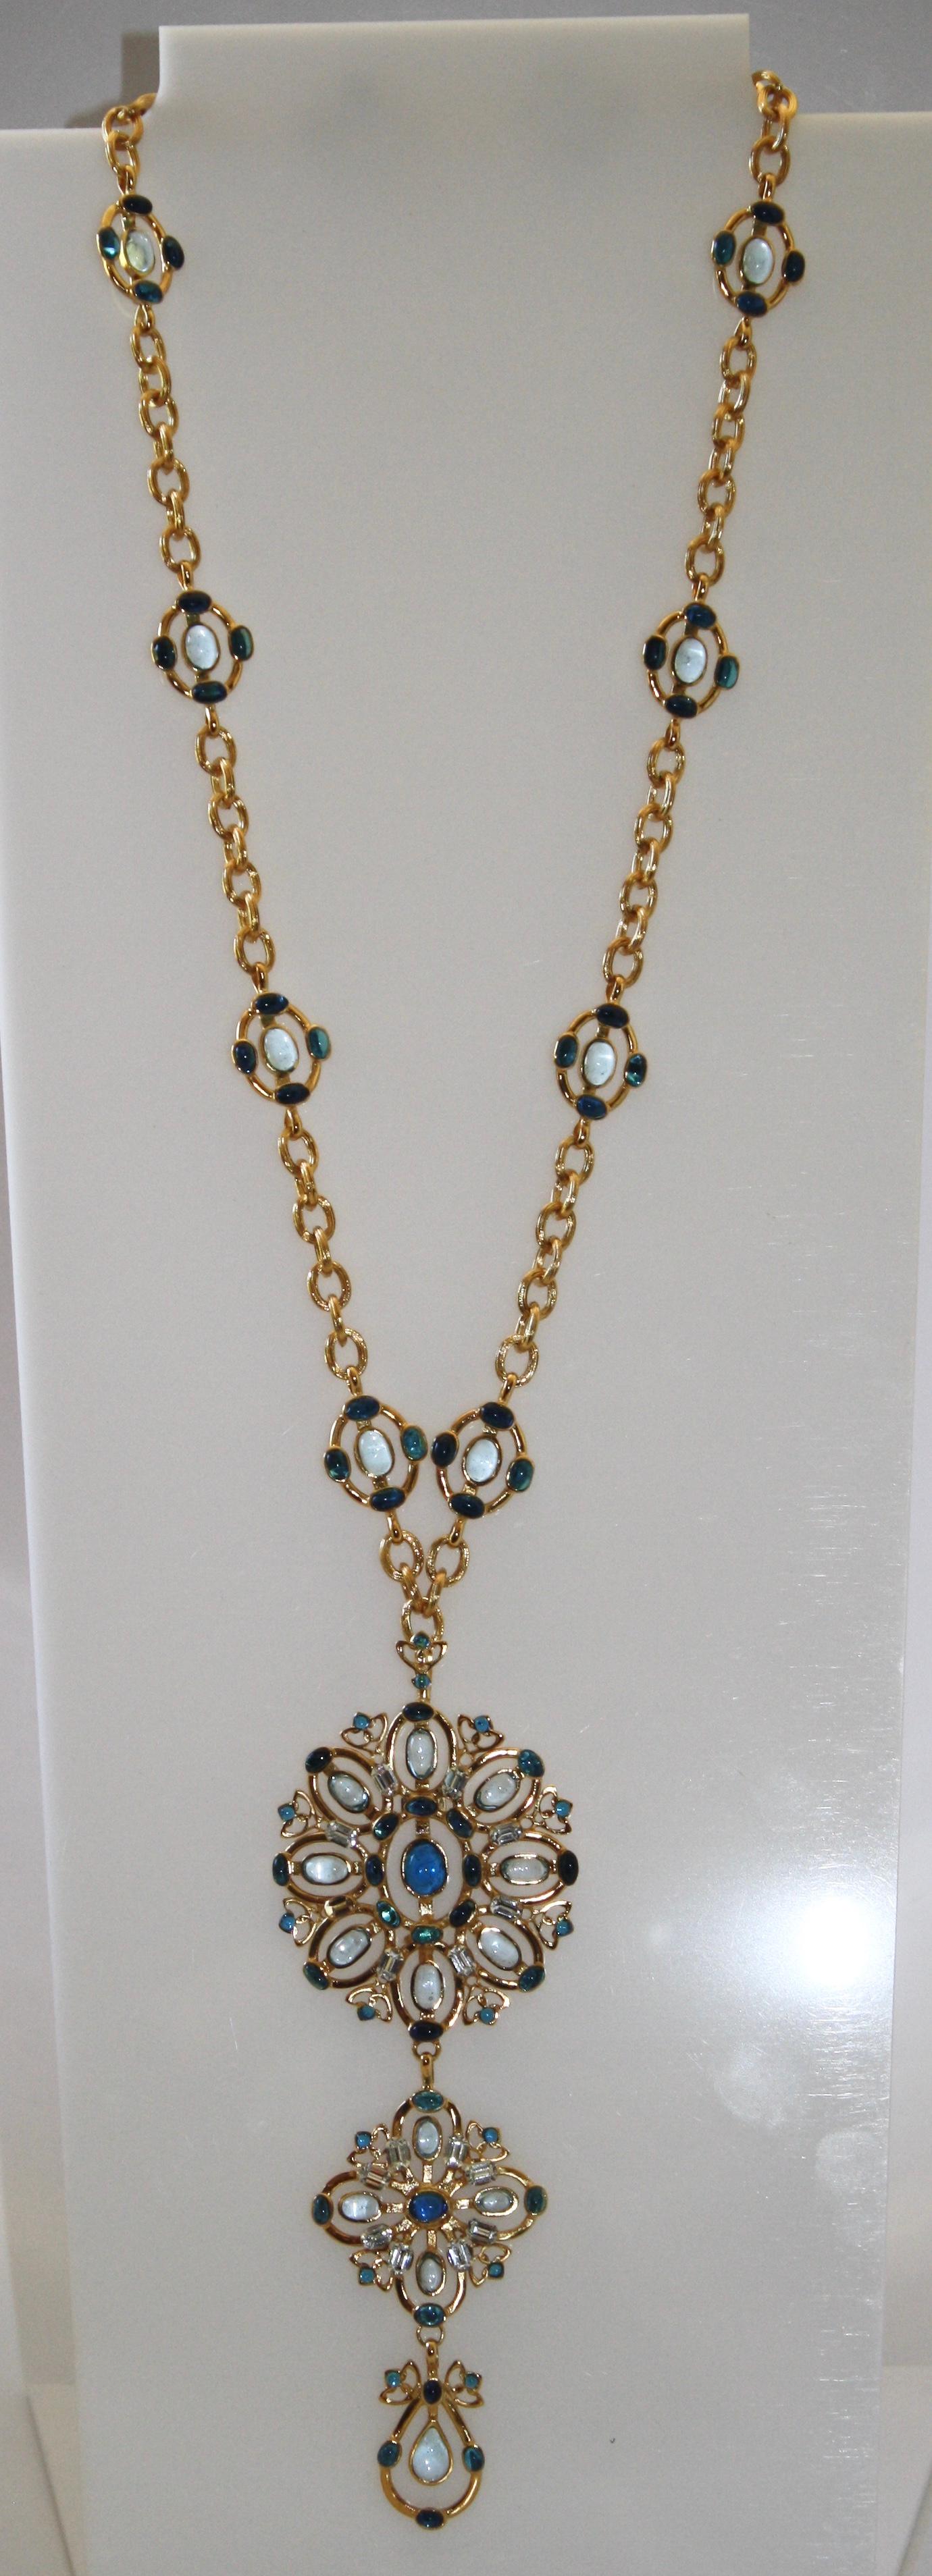 Multi shades of blue poured glass pendant necklace made with 24k gold plated chain. 

Chain is 75cm and pendant is 14.5cm